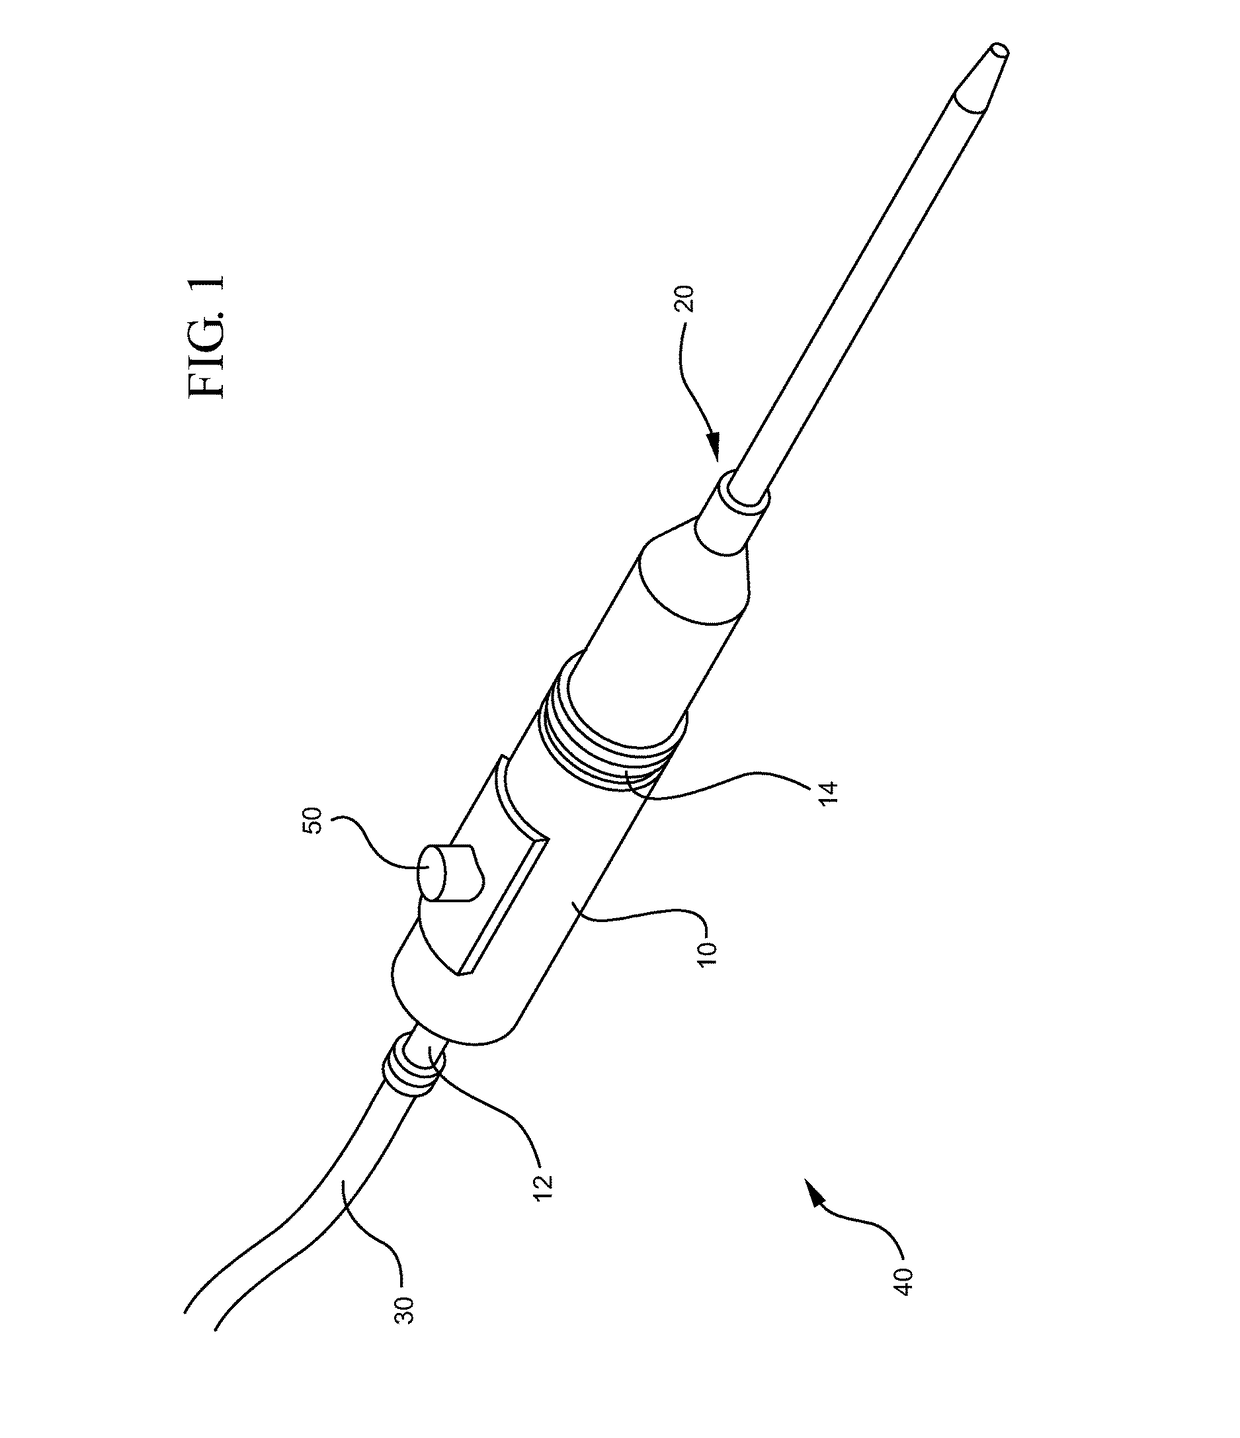 Catheter adapter having UV-C antimicrobial radiation source and access window within catheter lumen for intravenous therapy